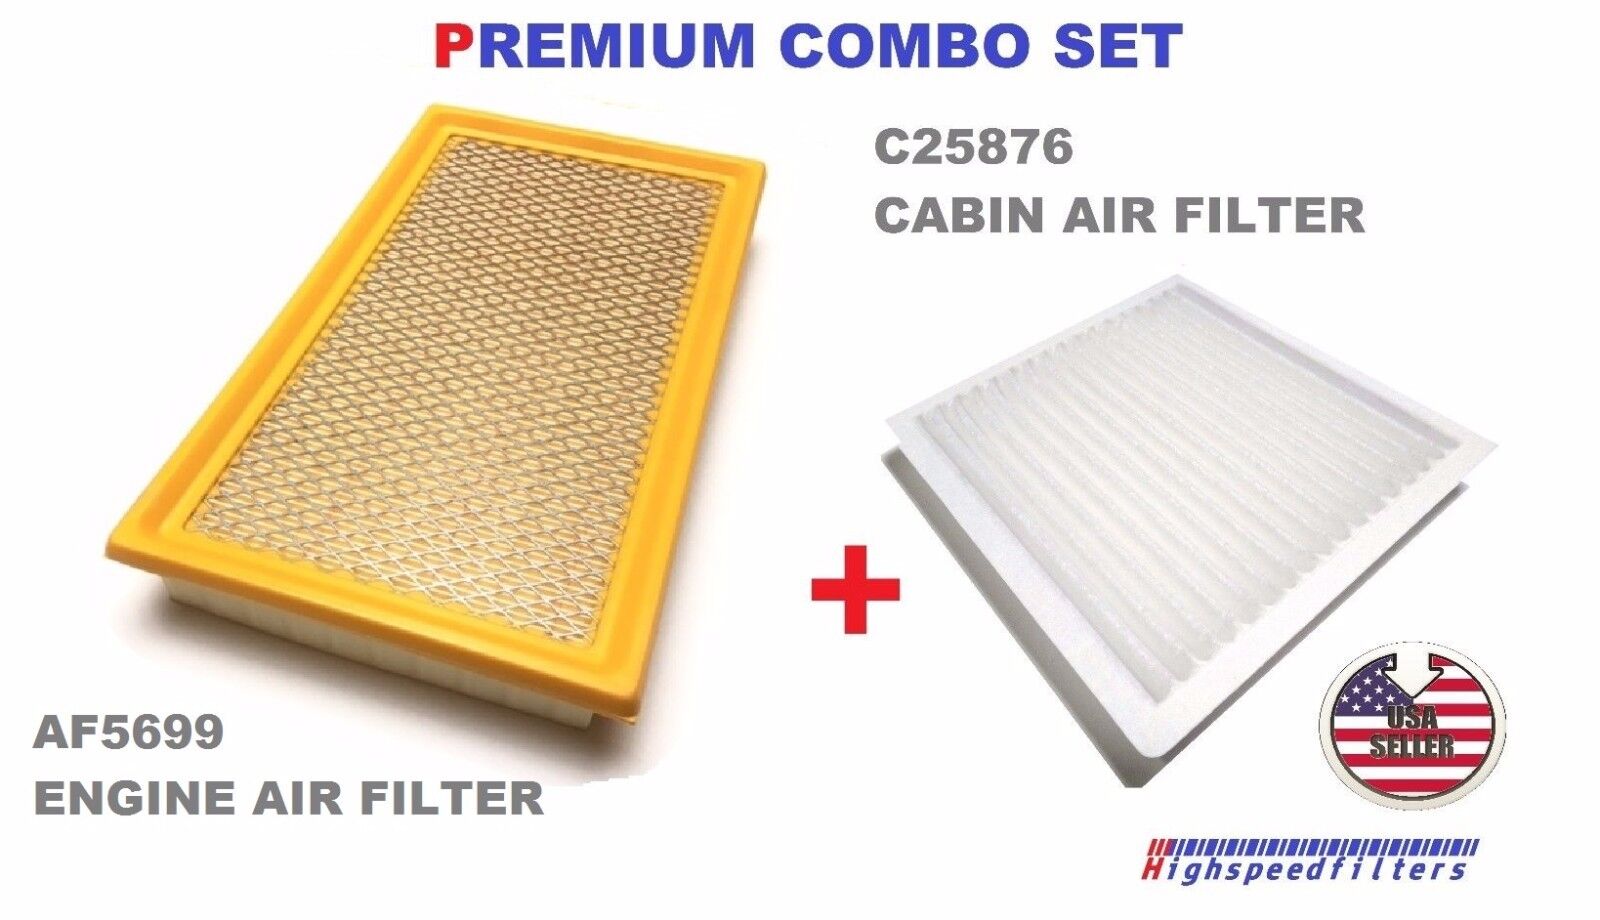 COMBO Air Filter & Cabin Air Filter for 2007 - 2015 CX-9 & MKX AF5699 C25876 